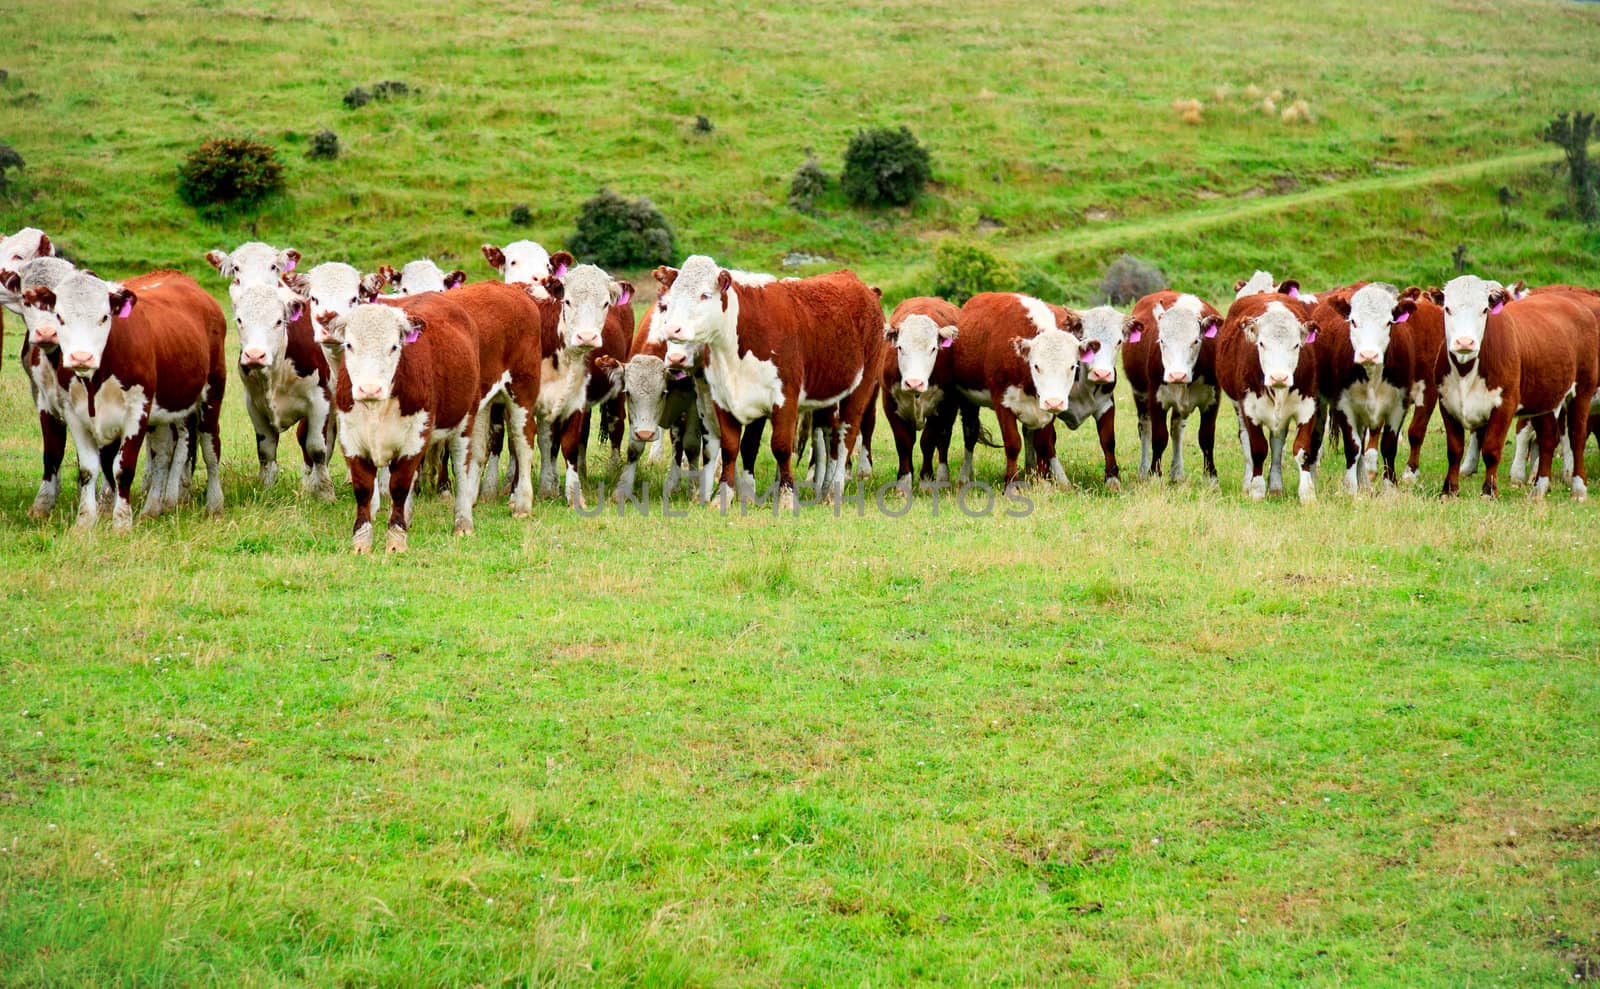 Calves at a pasture in New Zealand